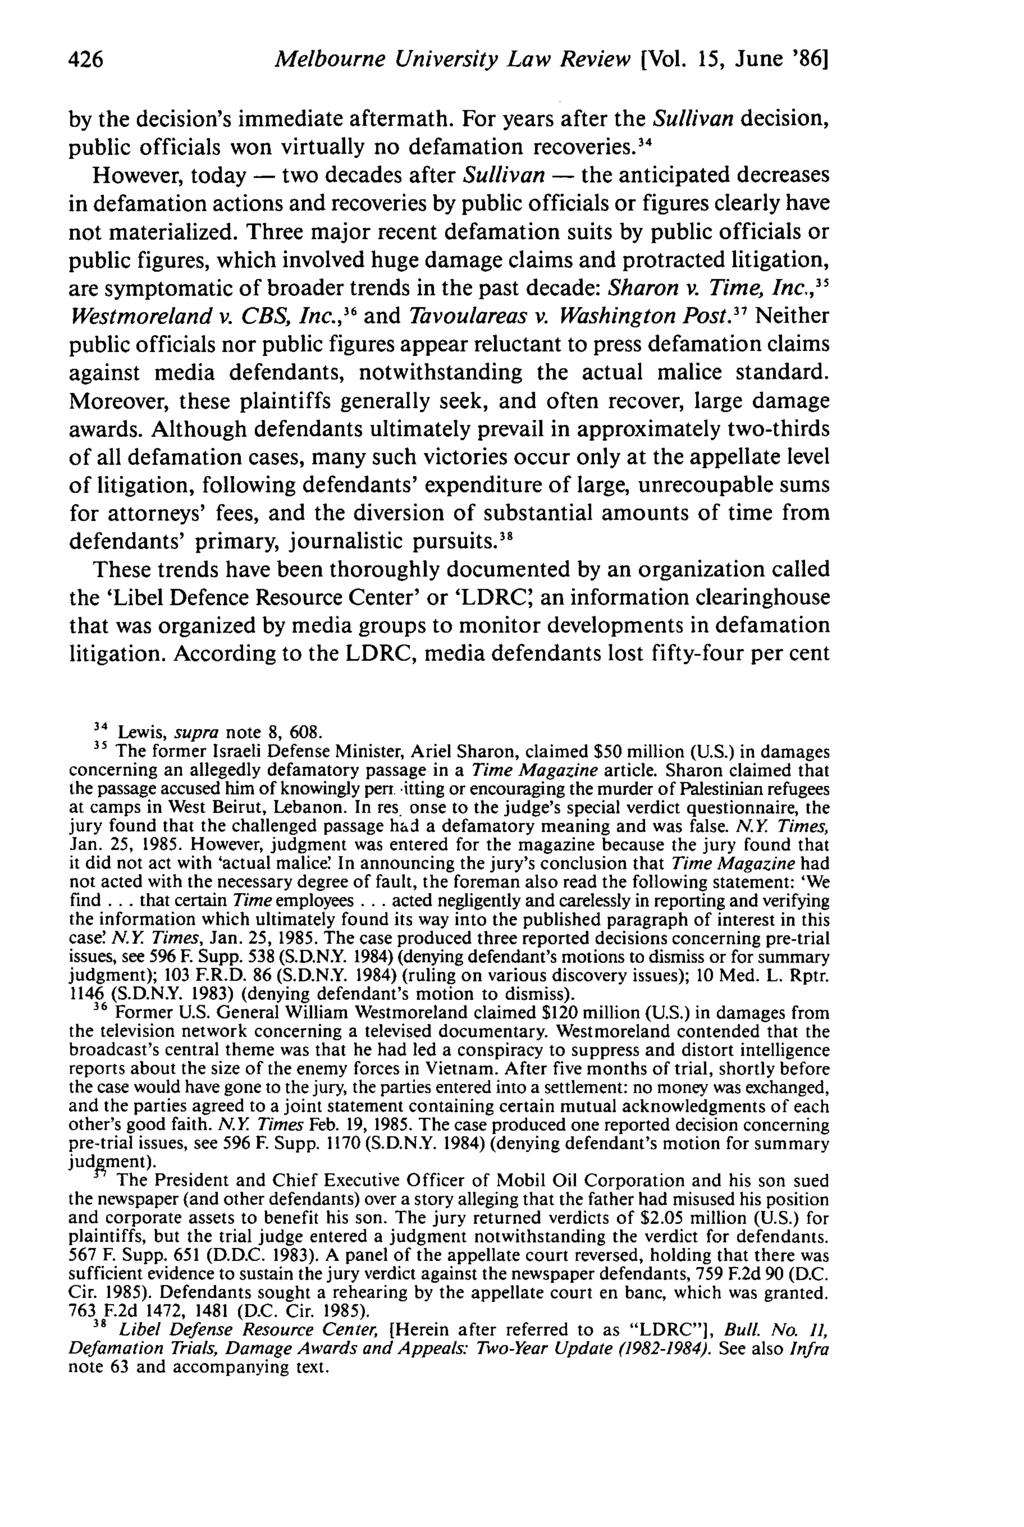 Melbourne University Law Review (Vol. 15, June '86] by the decision's immediate aftermath. For years after the Sullivan decision, public officials won virtually no defamation recoveries.